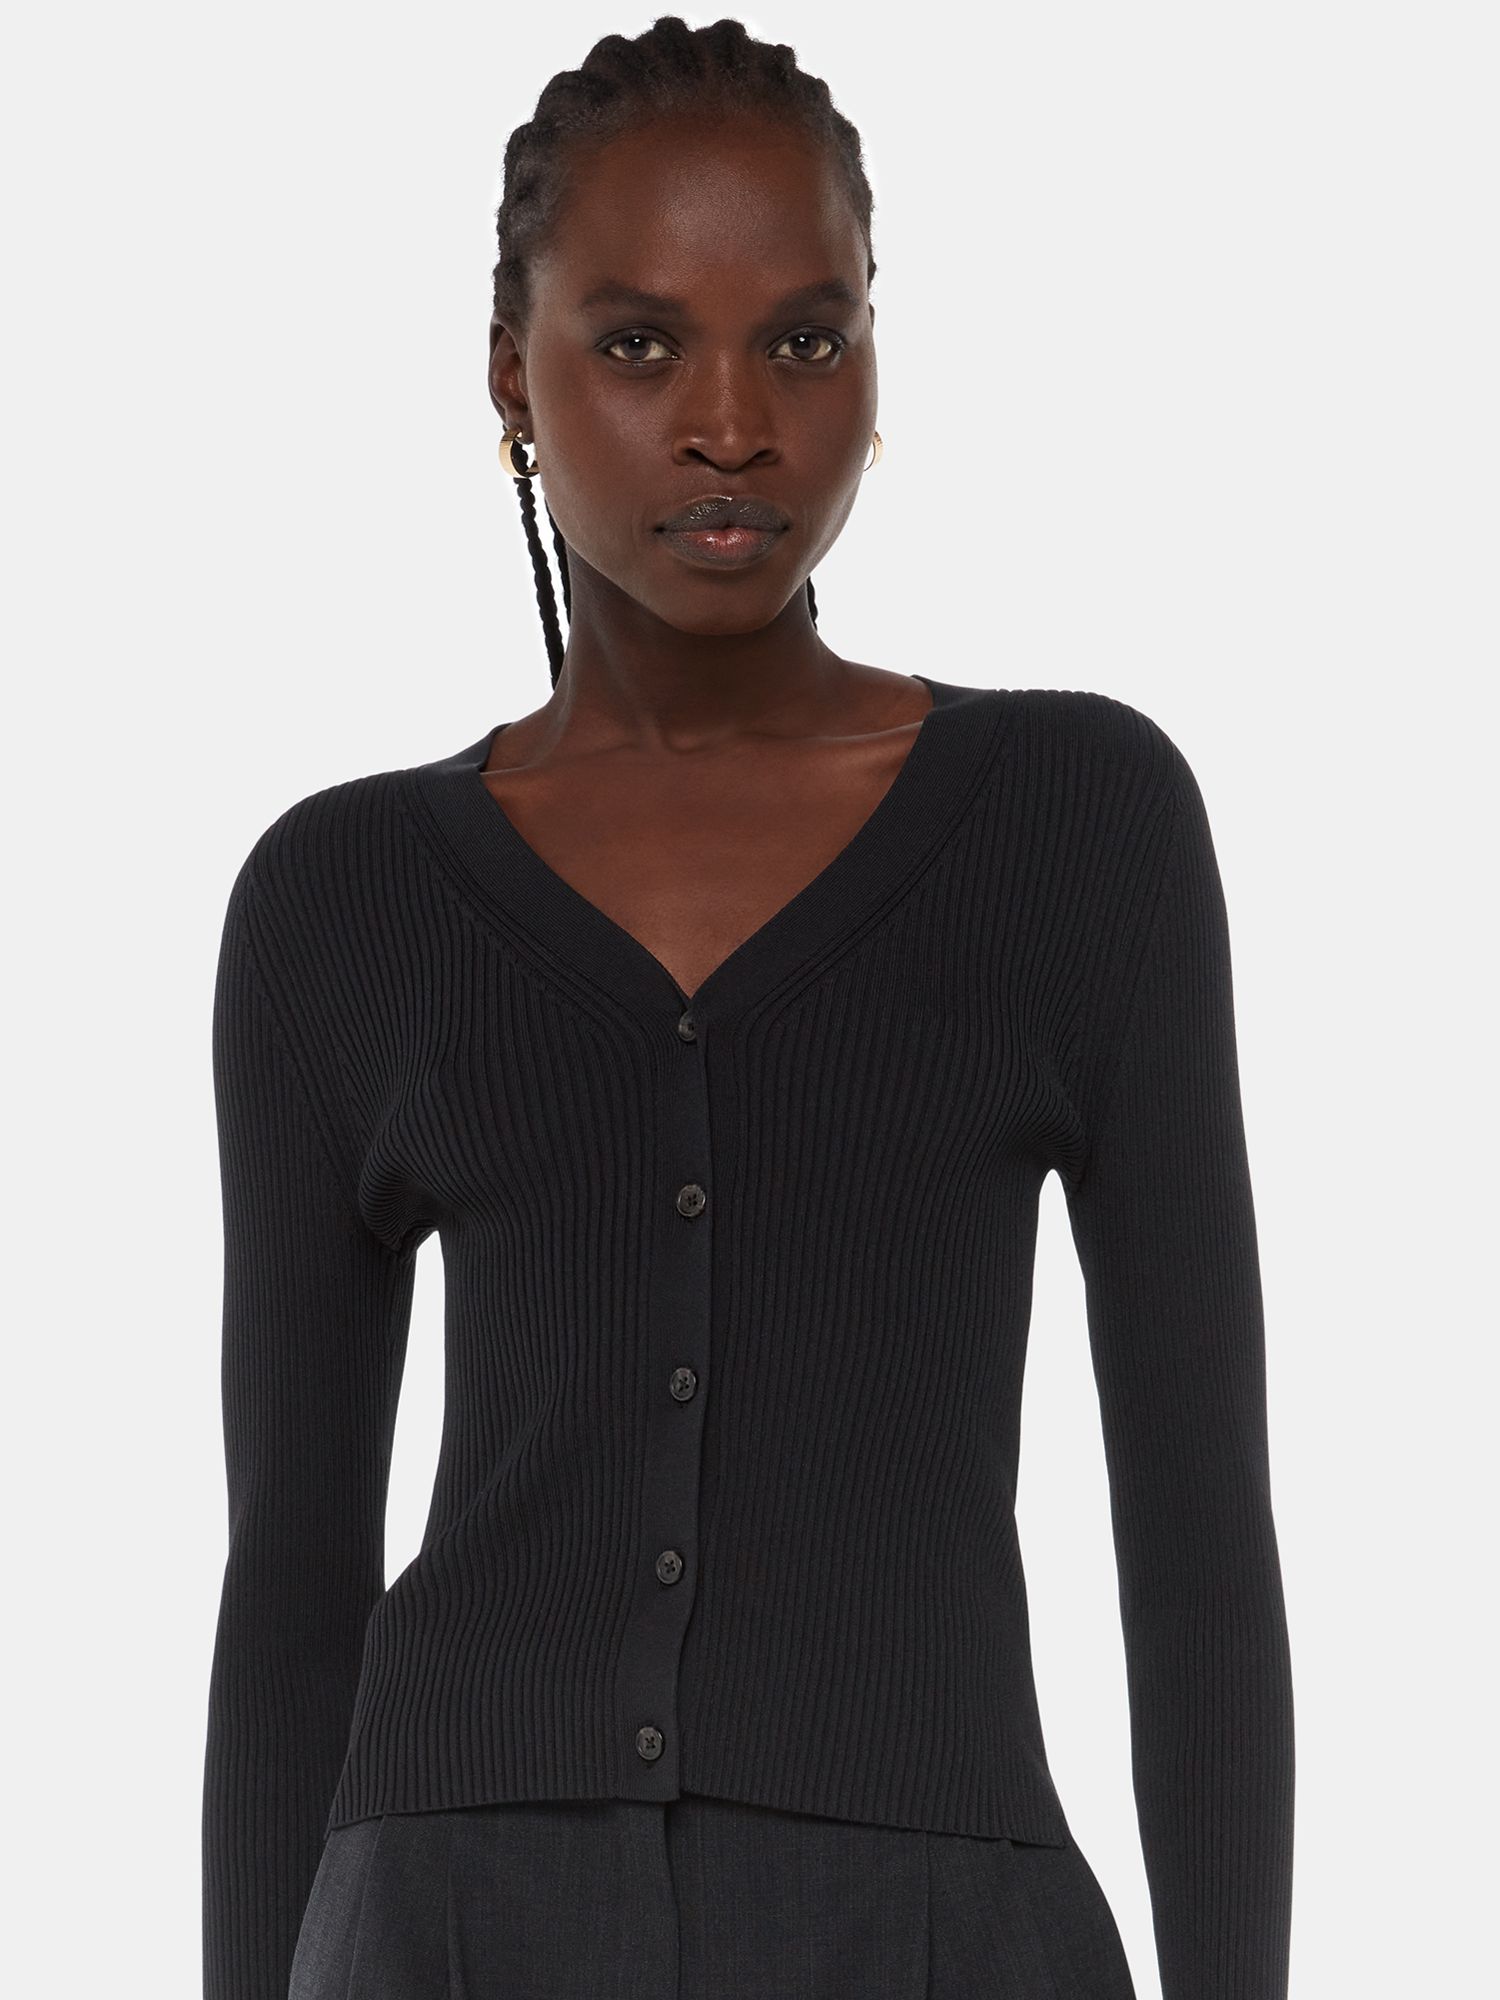 Women's Cropped Cardigan Long Sleeve V Neck Hook and Eye Knit Tops